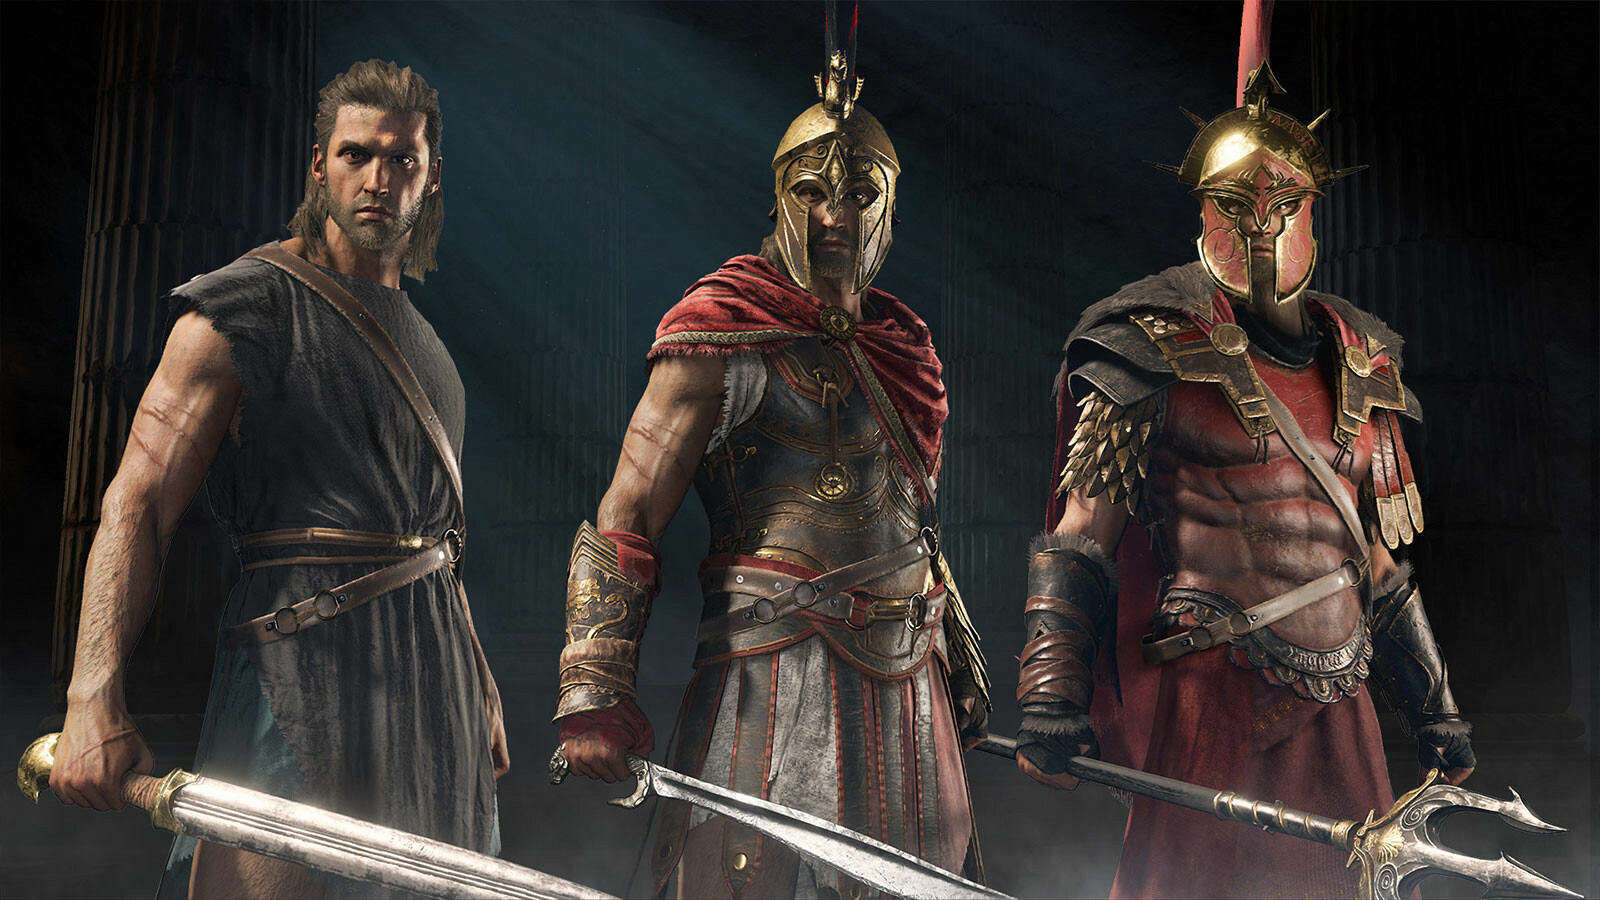 Kaufen Assassin's Creed® Odyssey – GOLD-EDITION